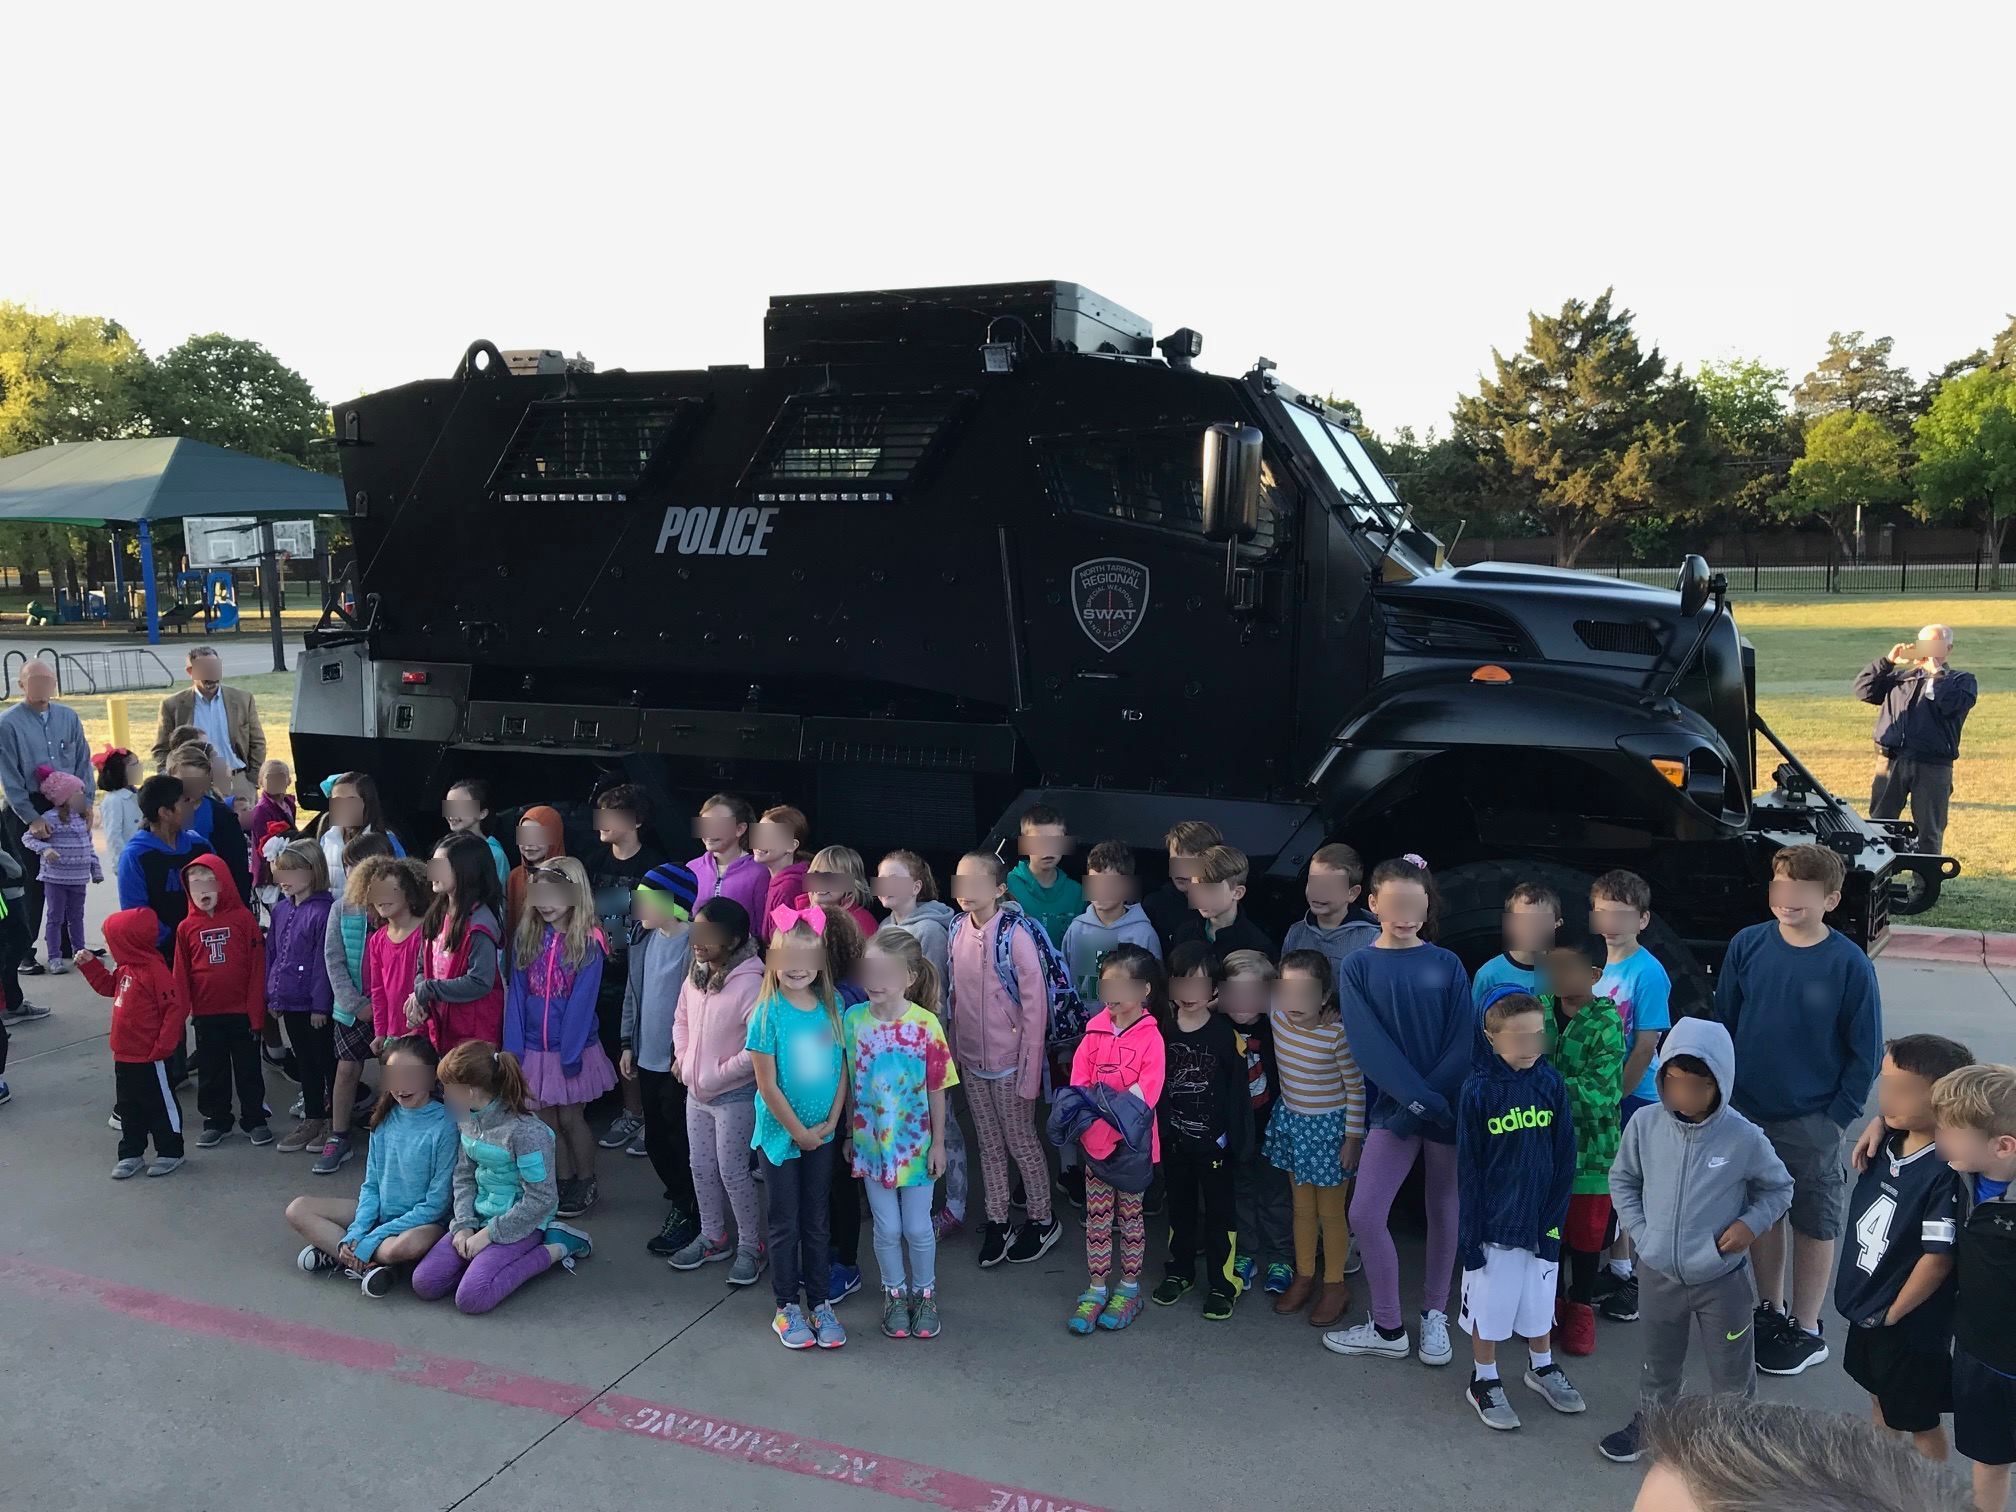 Children pose with a mine-resistant ambush protected vehicle in Southlake, Texas.